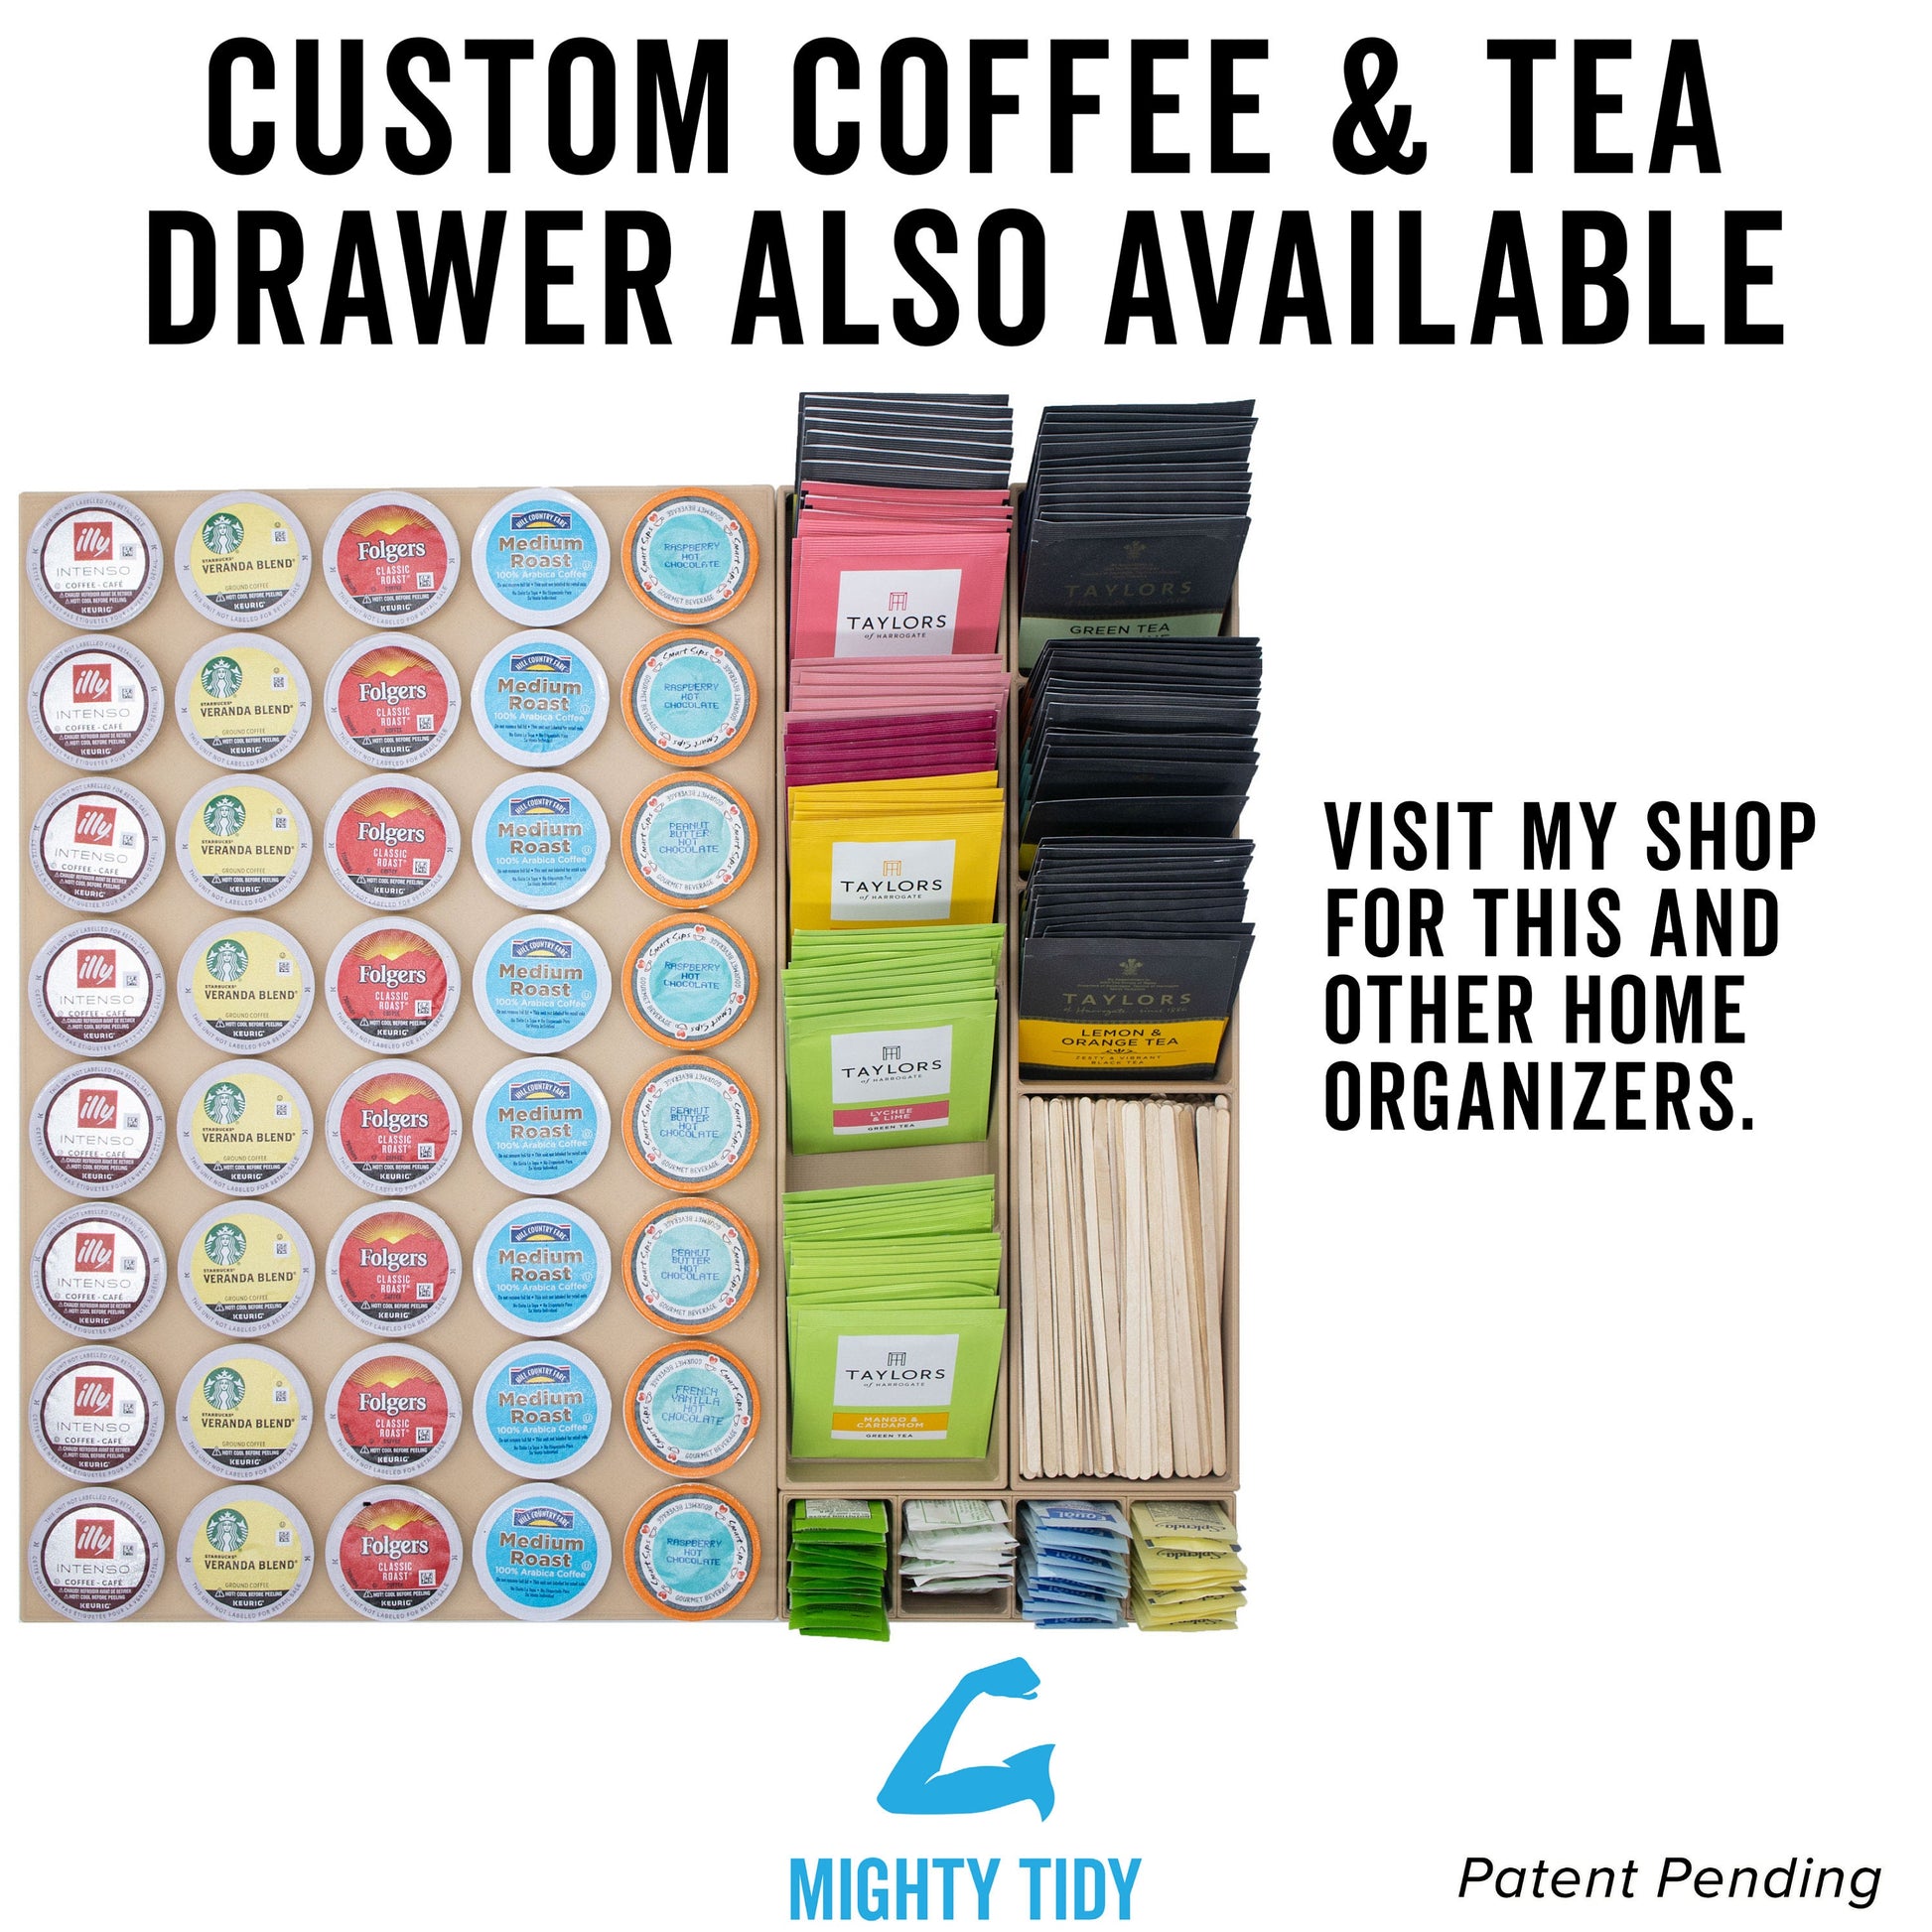 custom coffee & tea drawer organizers are also available